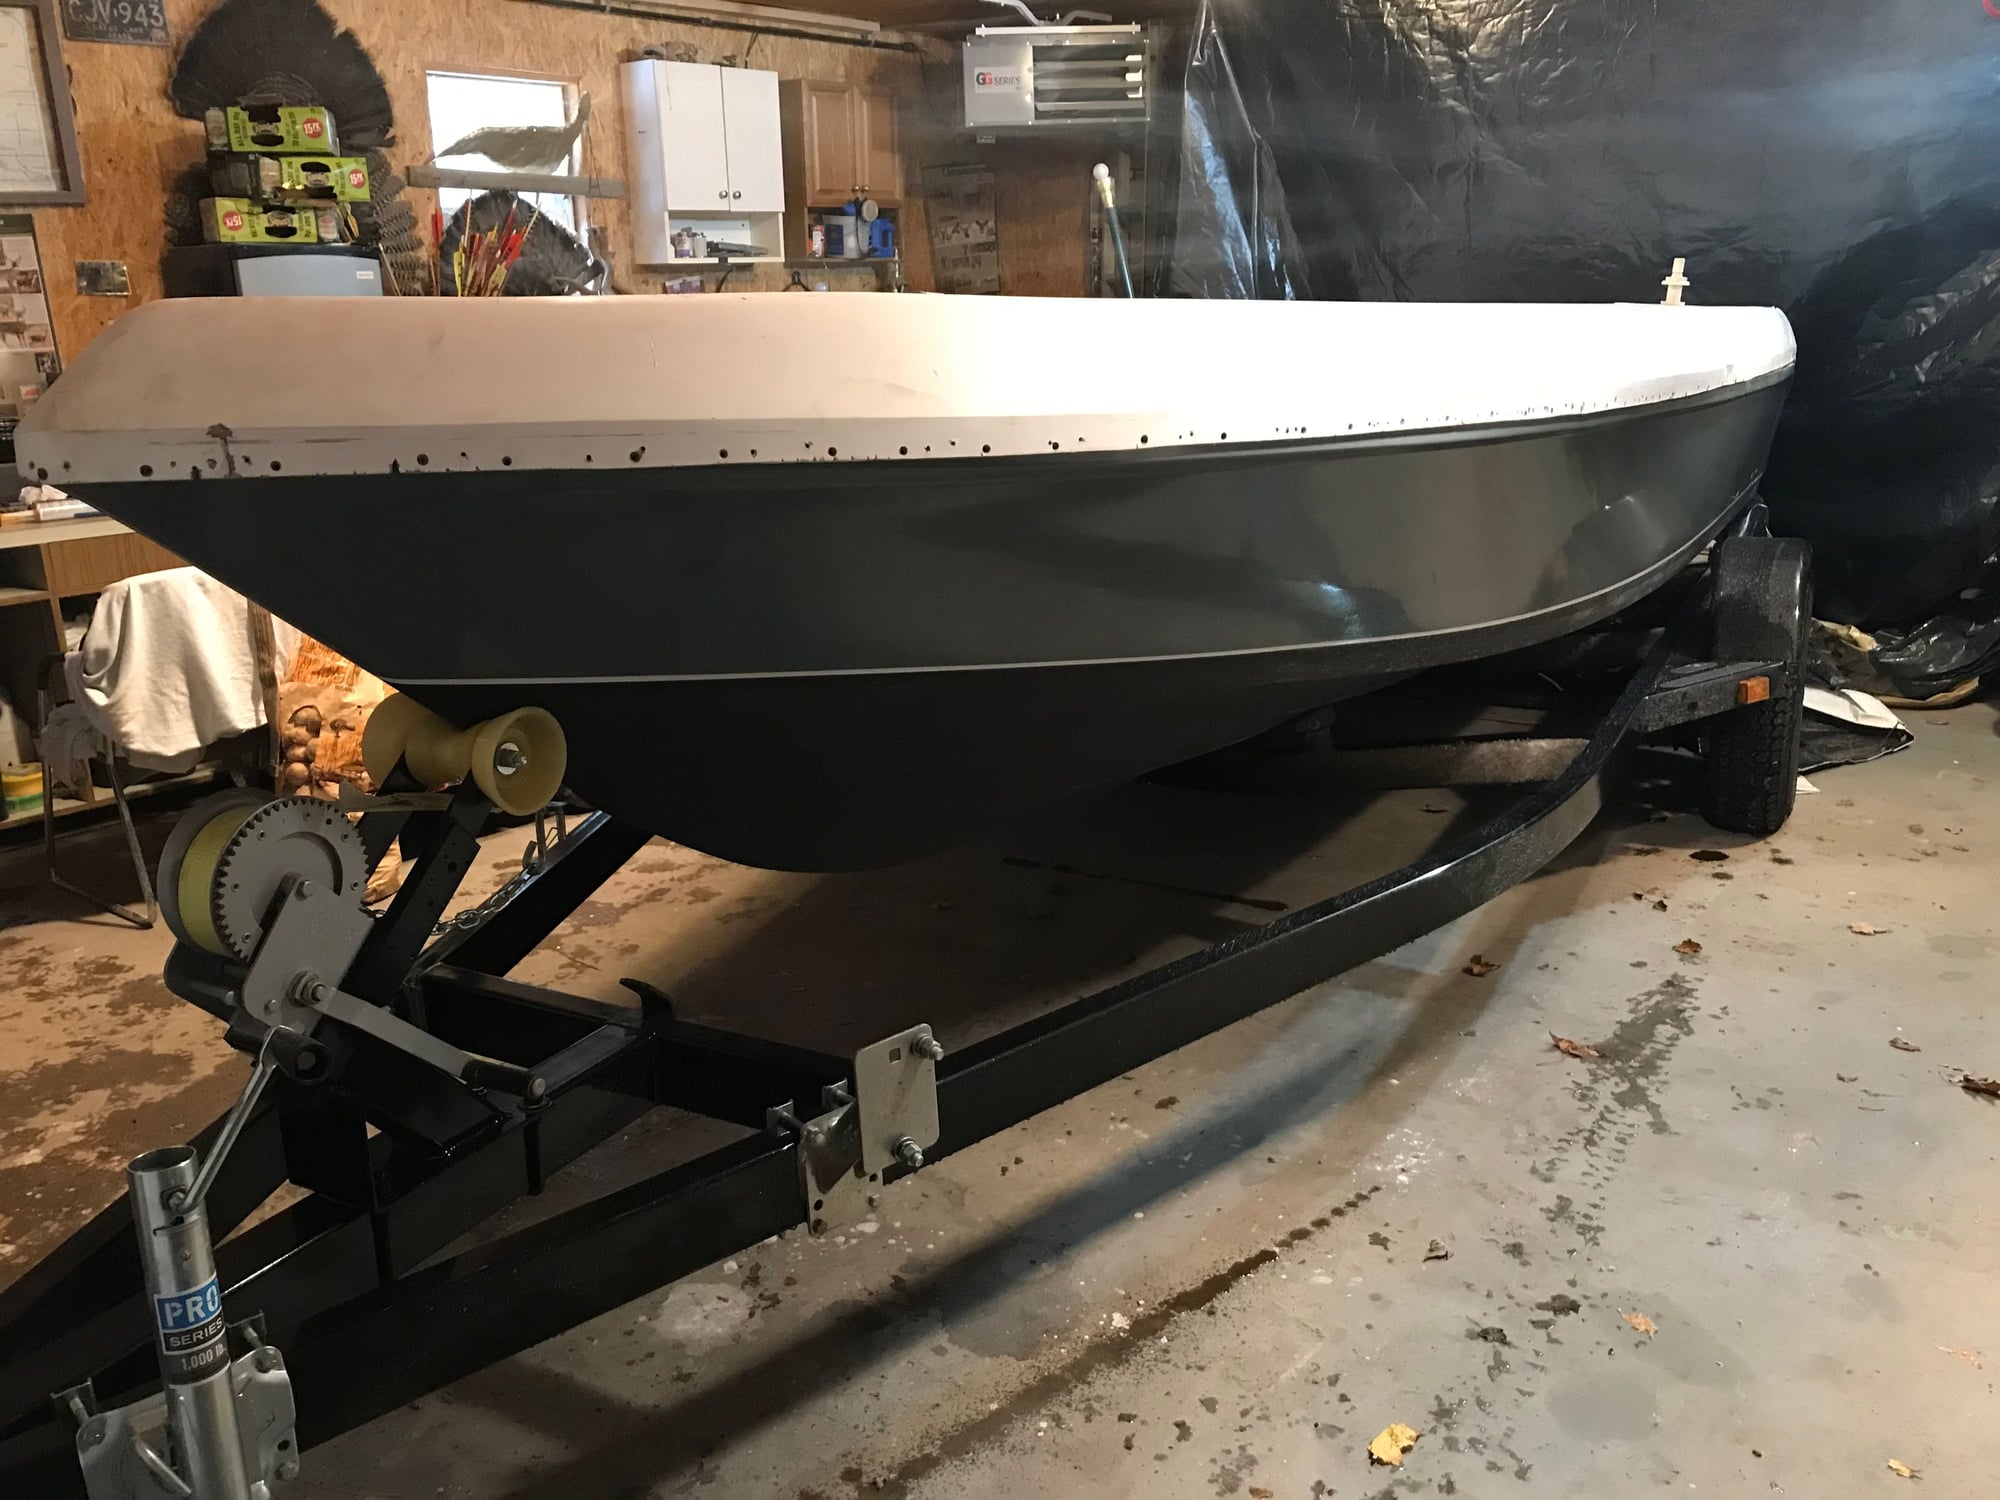 Top of boat doesn't fit back on hull, 3/8 in off! Need advice